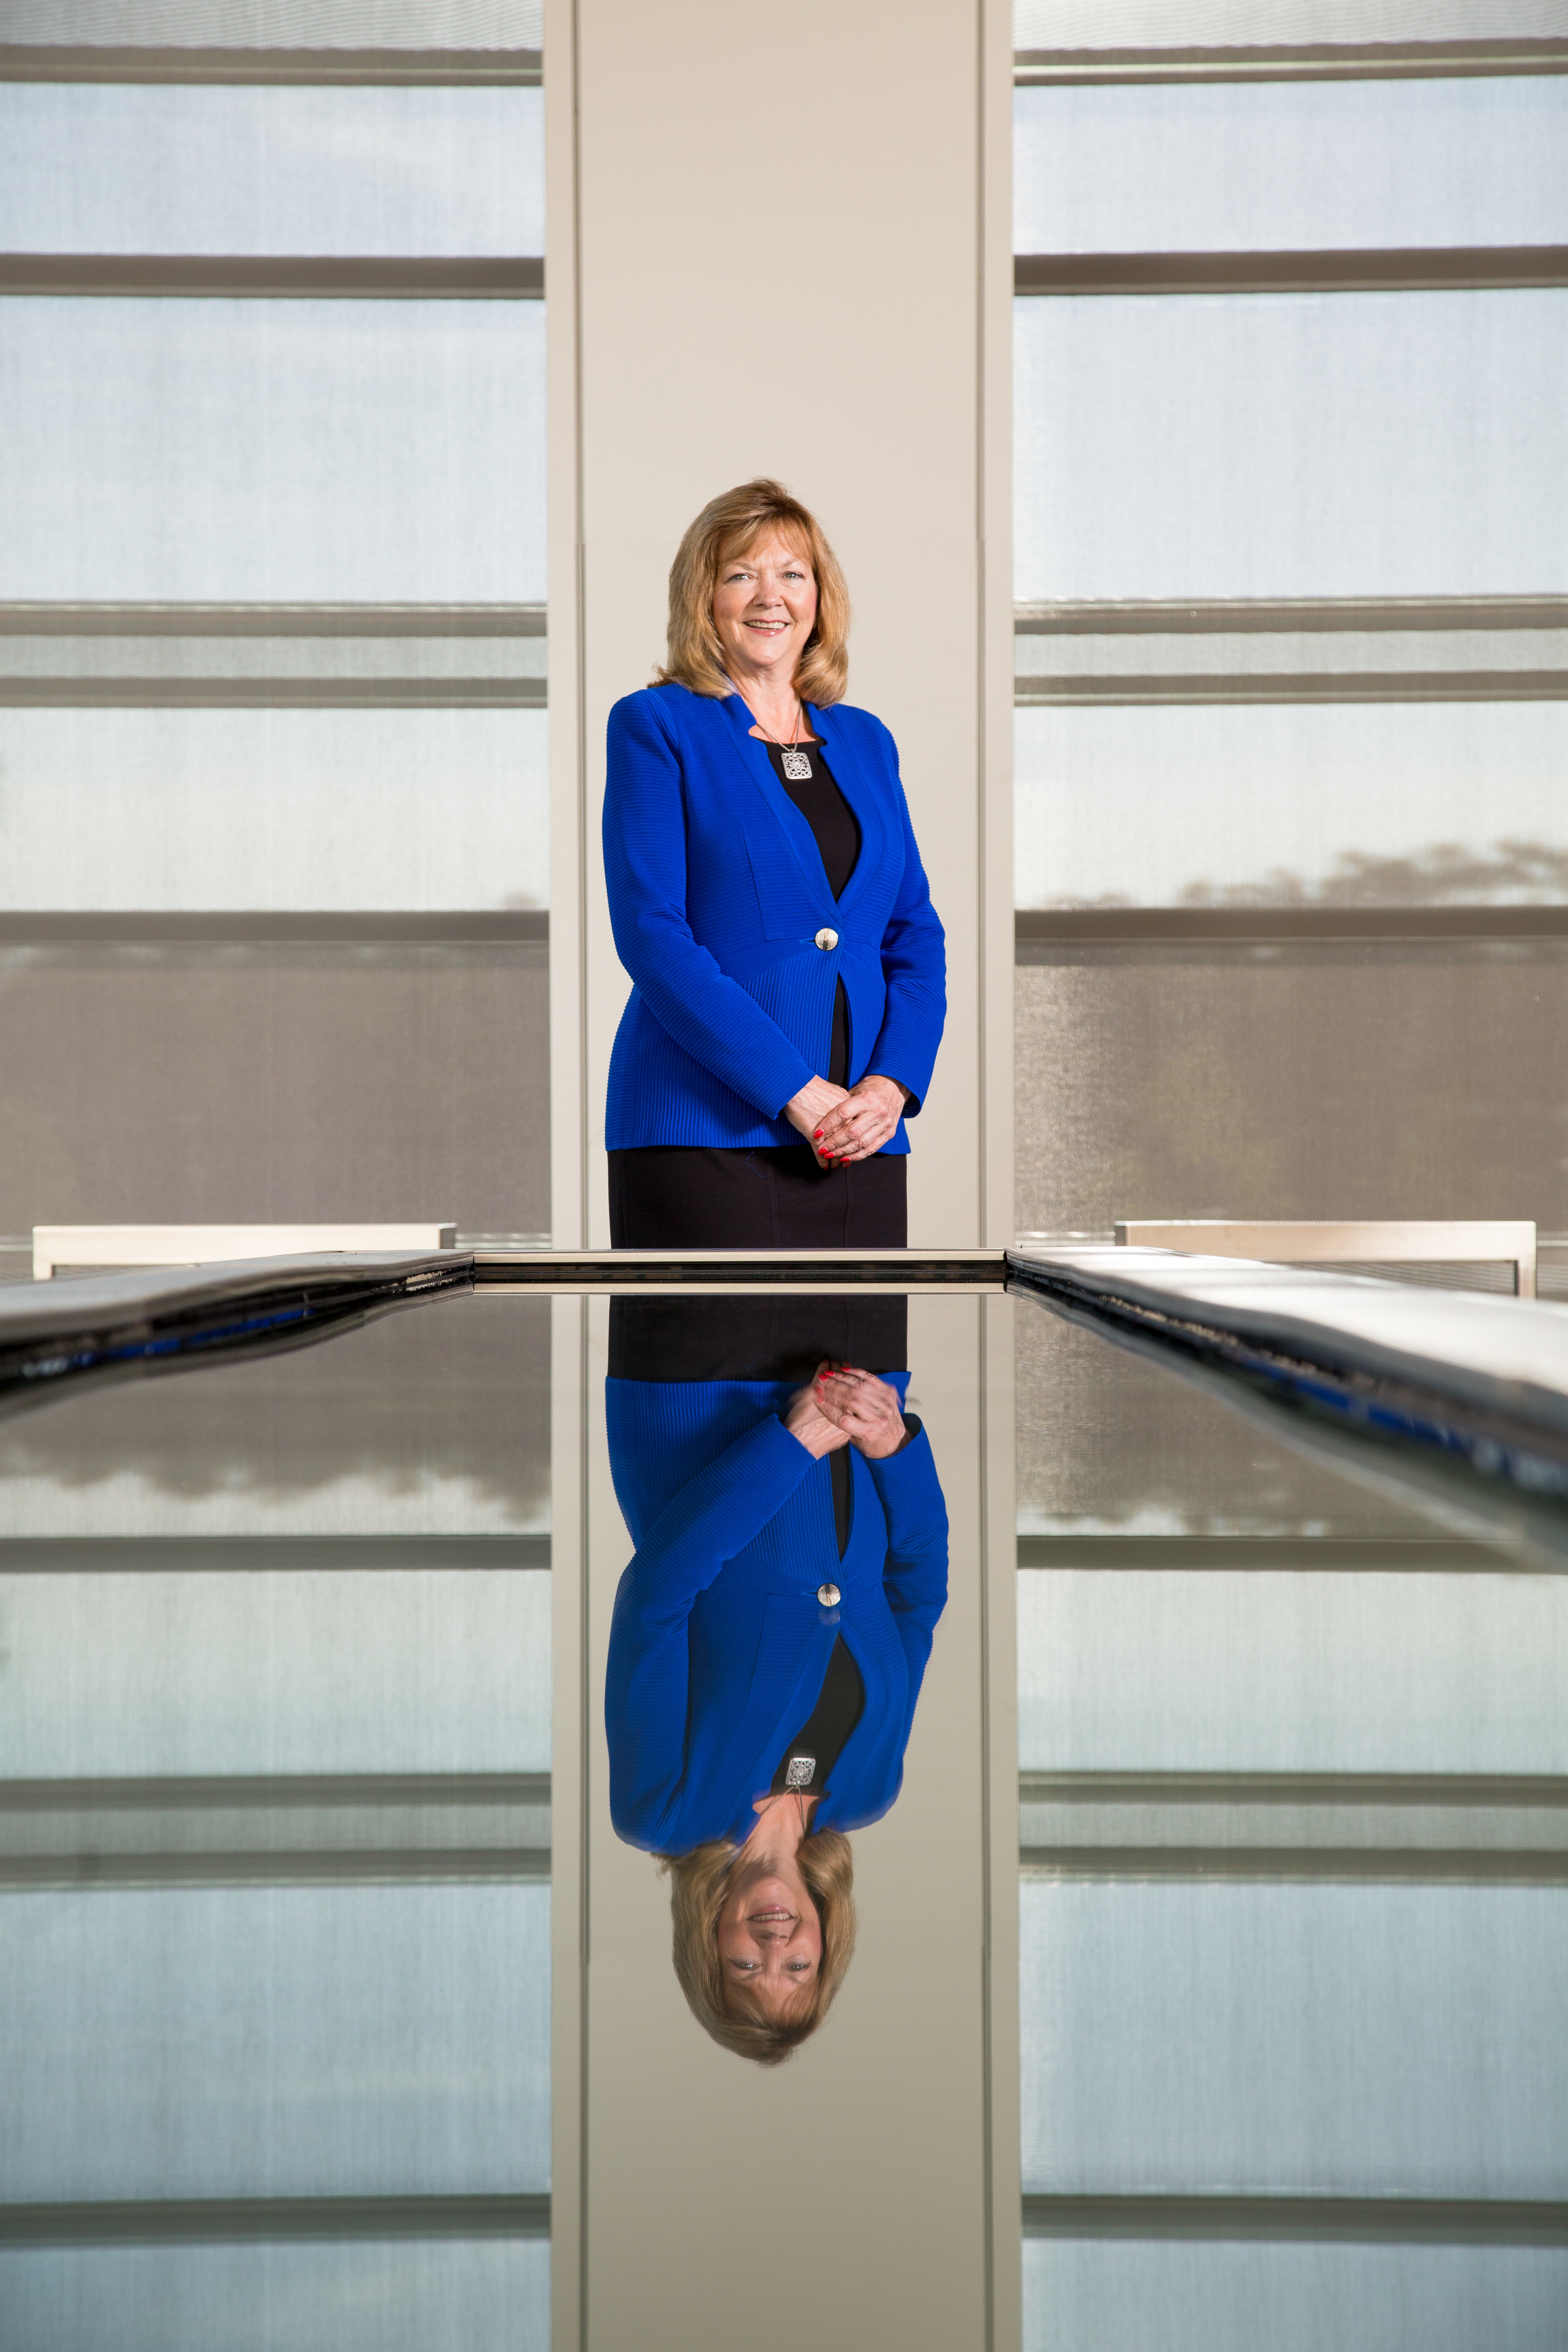 Sara Ortwein, President of ExxonMobil Upstream Research Company (URC) at the ExxonMobil campus, standing at far end of reflective table